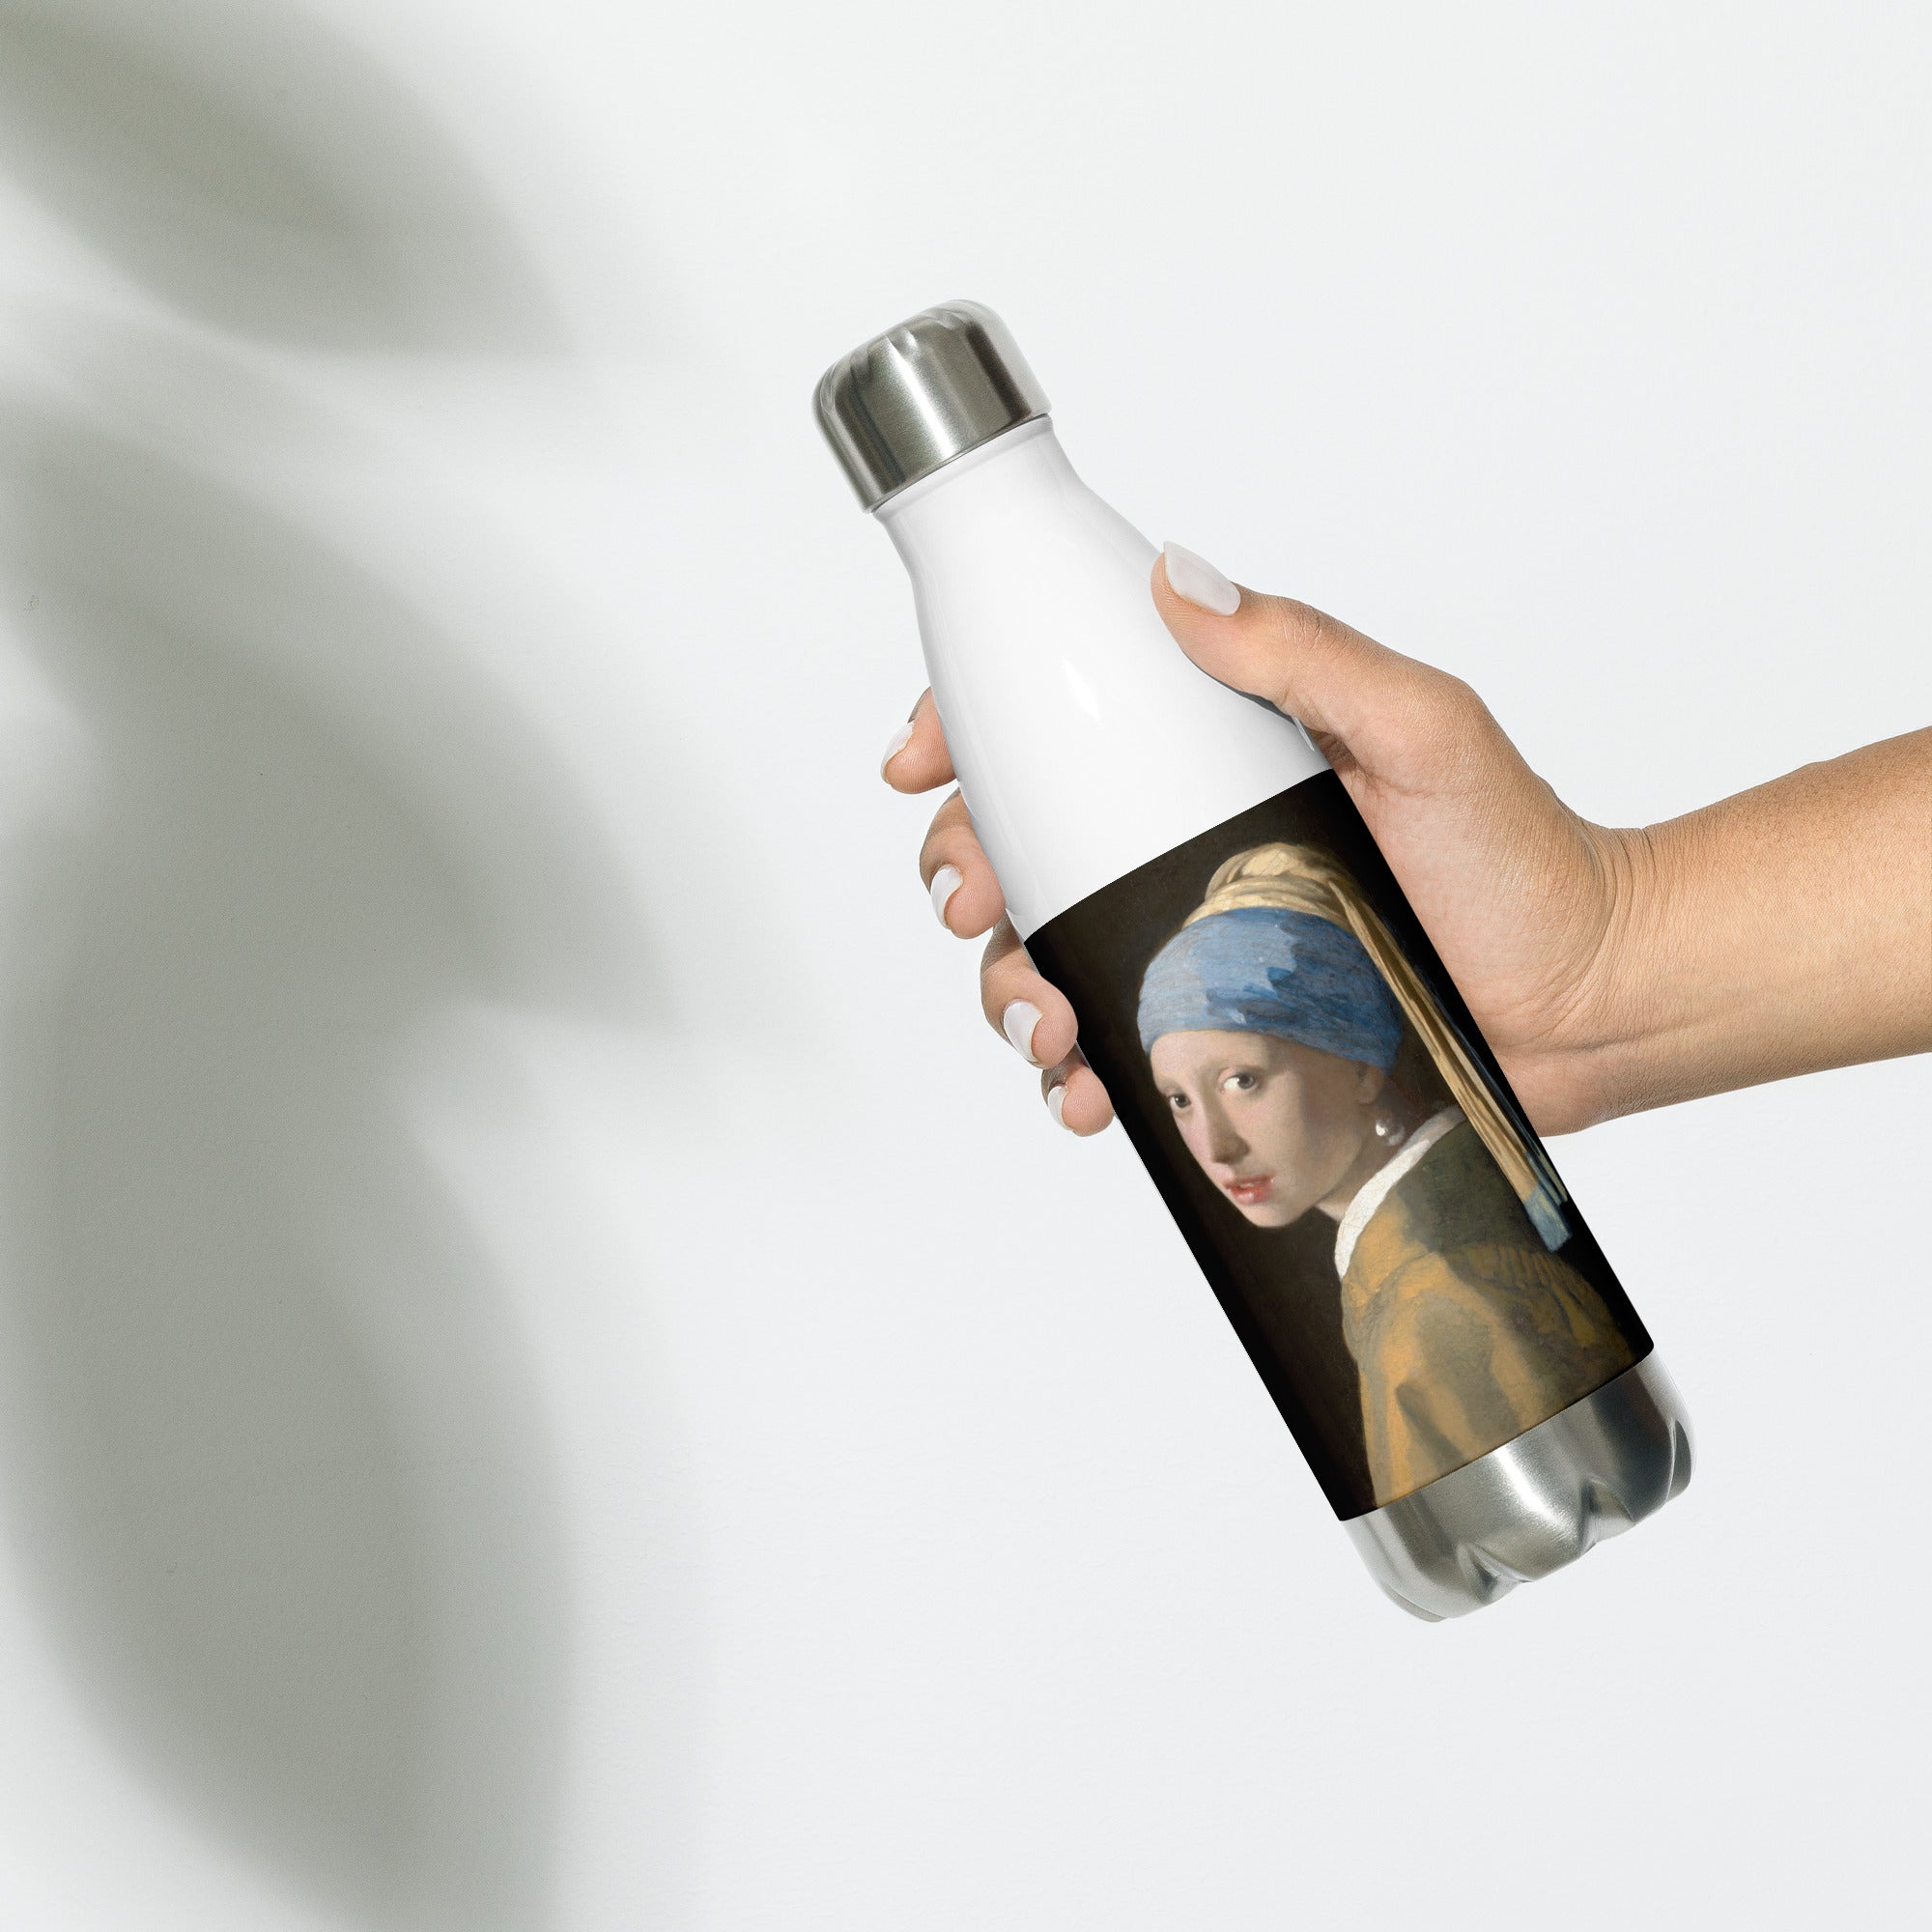 Johannes Vermeer 'Girl with a Pearl Earring' Famous Painting Water Bottle | Stainless Steel Art Water Bottle